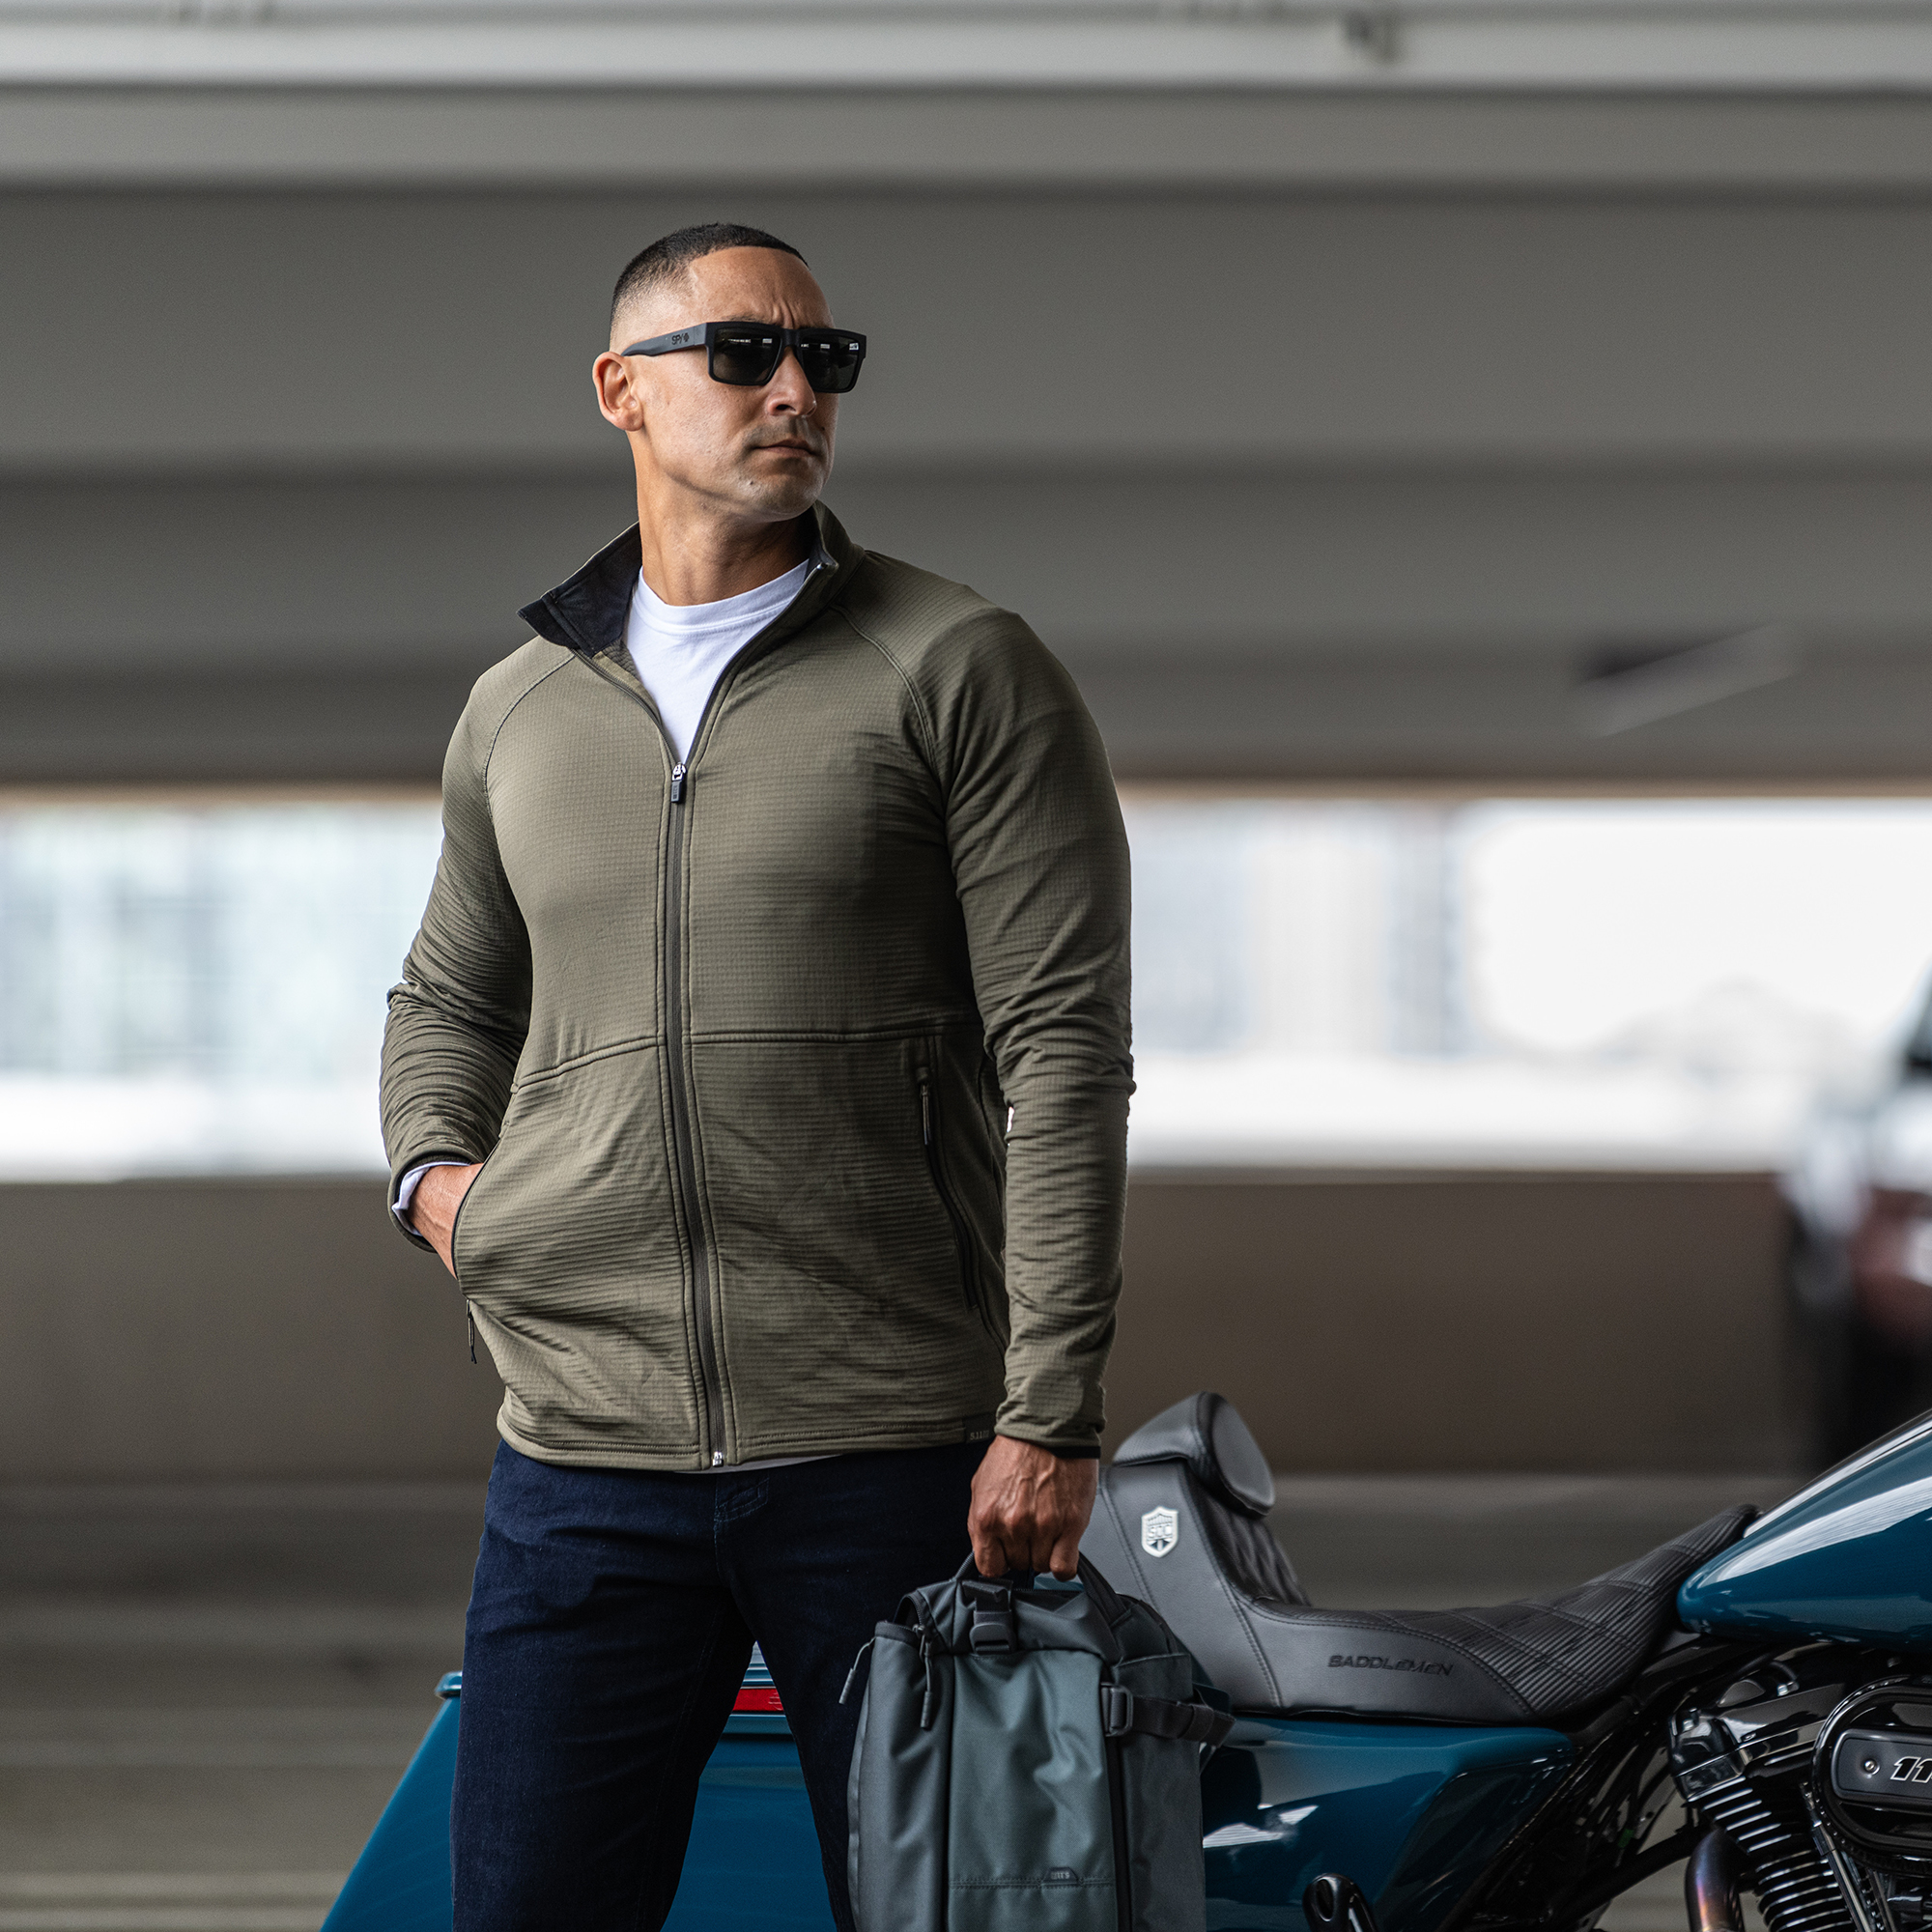 New Fall Technical Apparel Line Announced By 5.11 Tactical